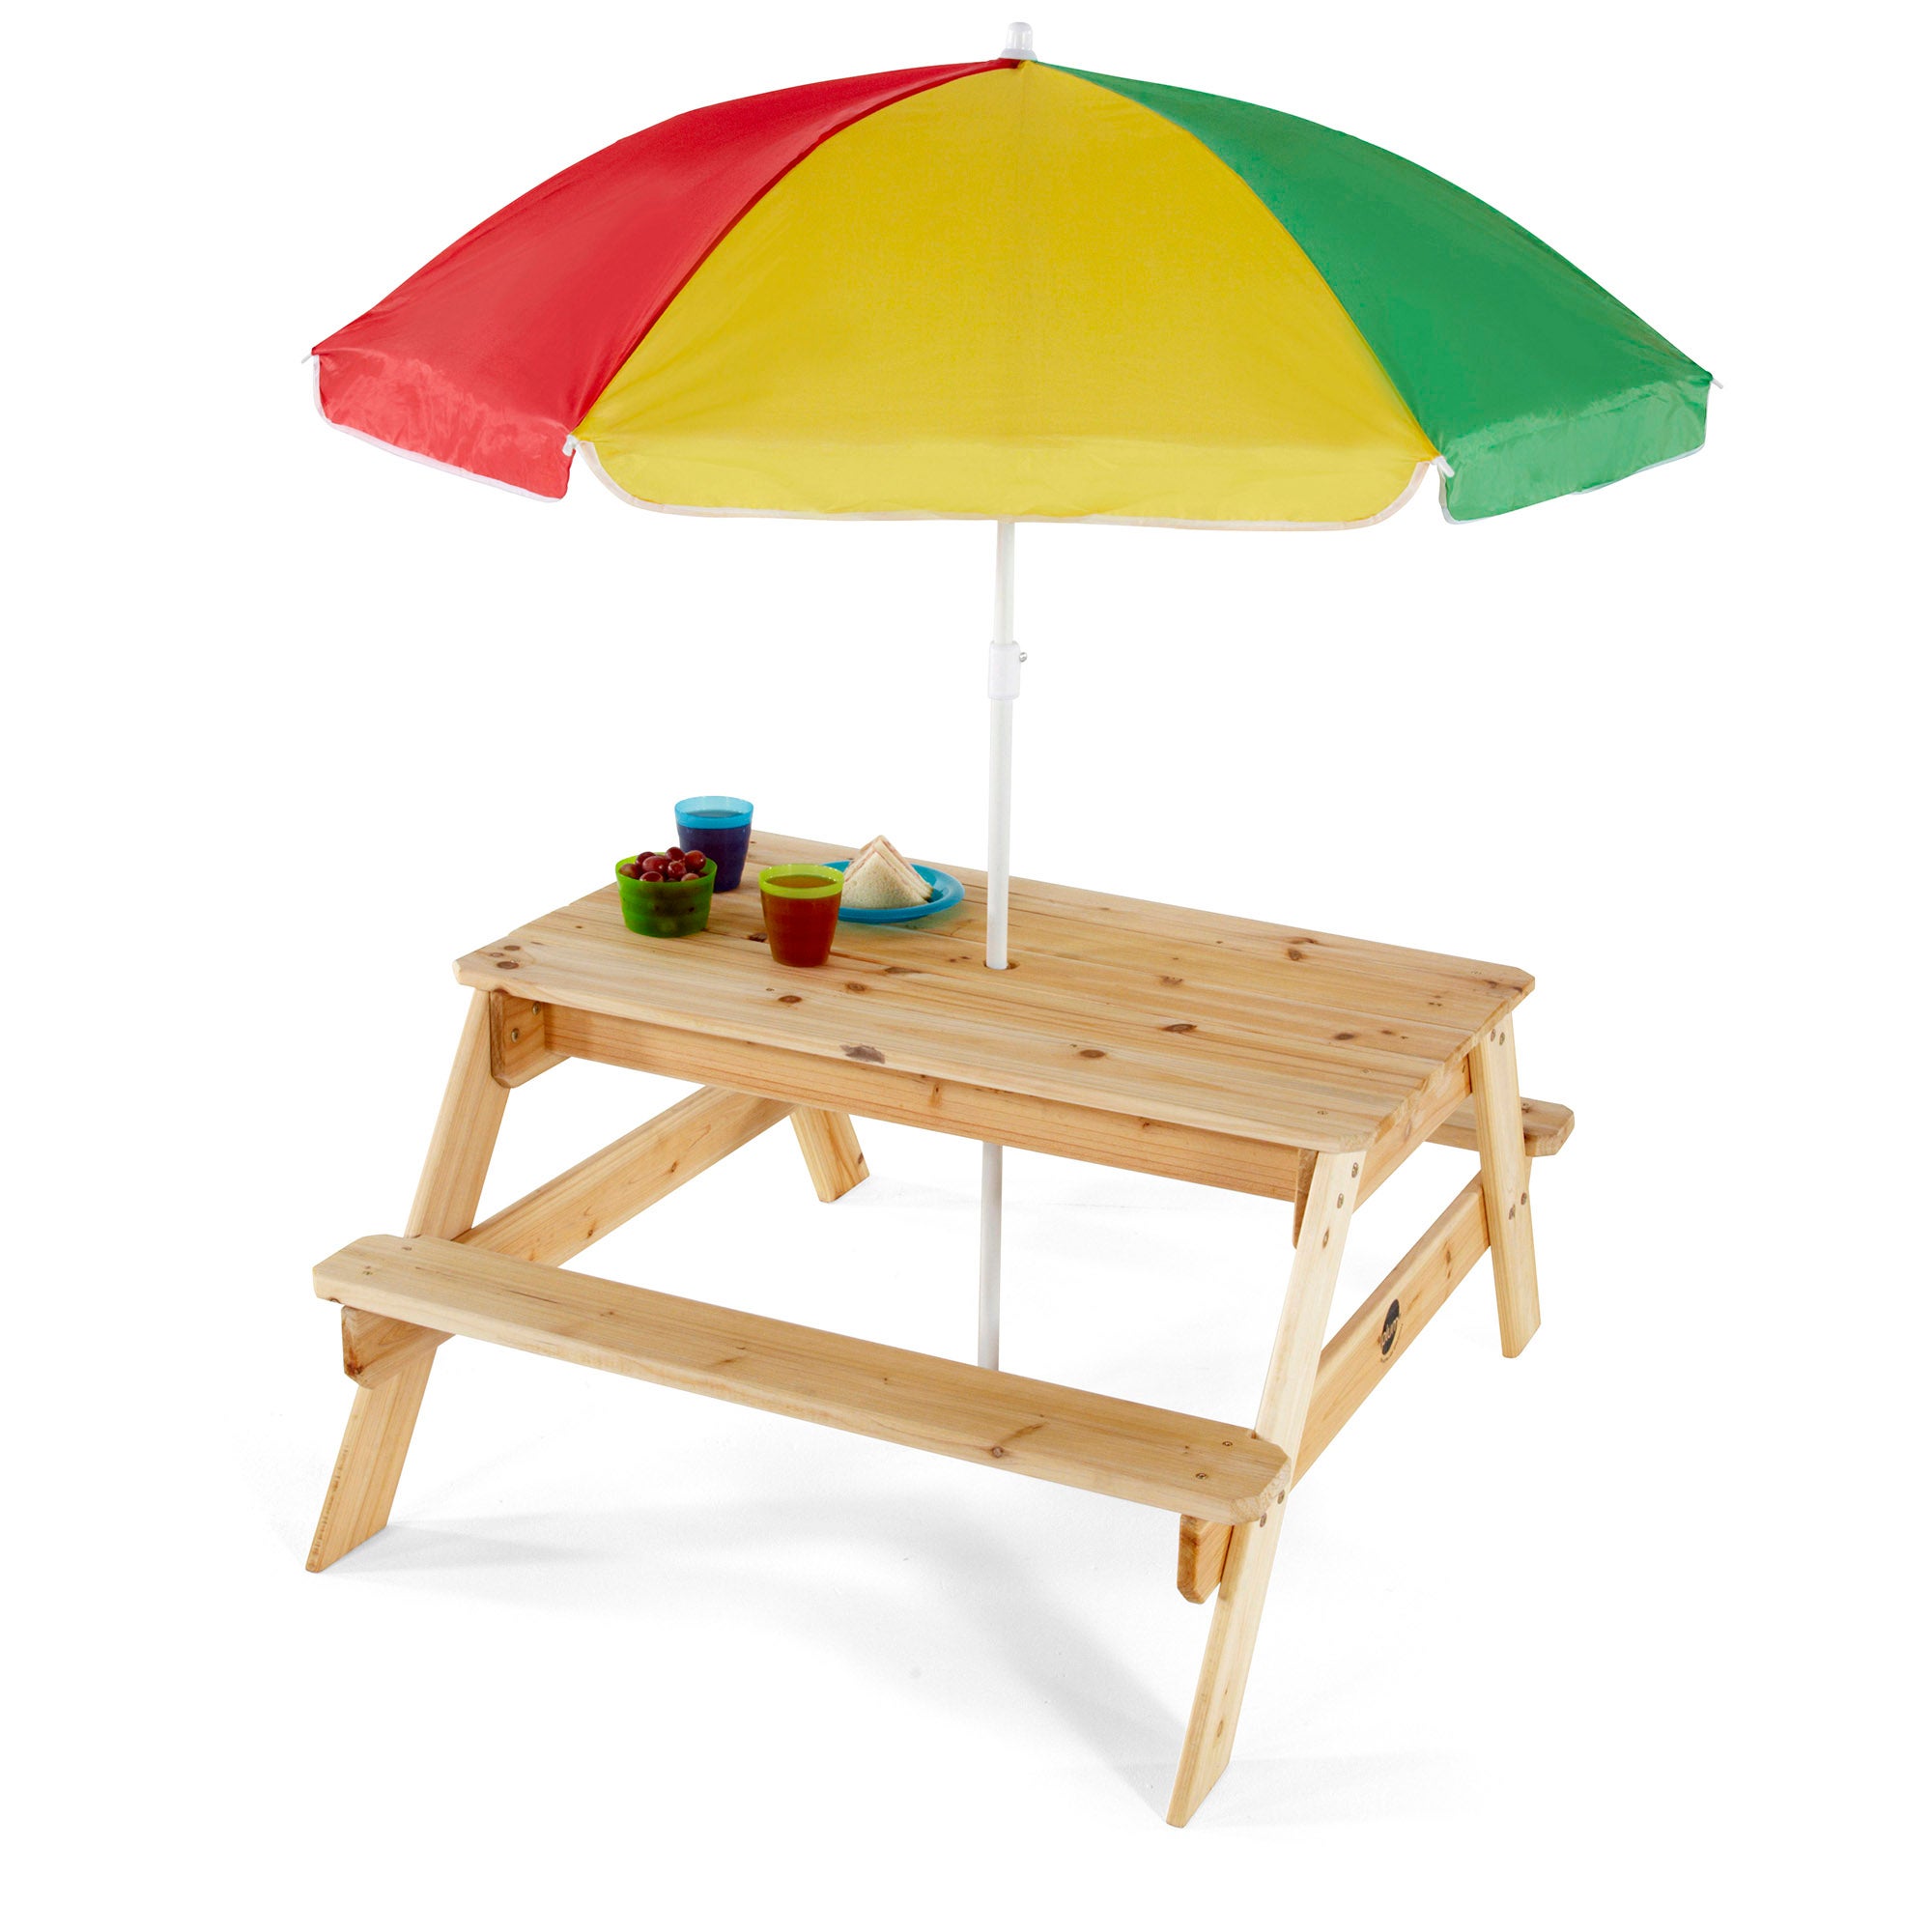 Plum Play Kids Wooden Picnic Table with Umbrella